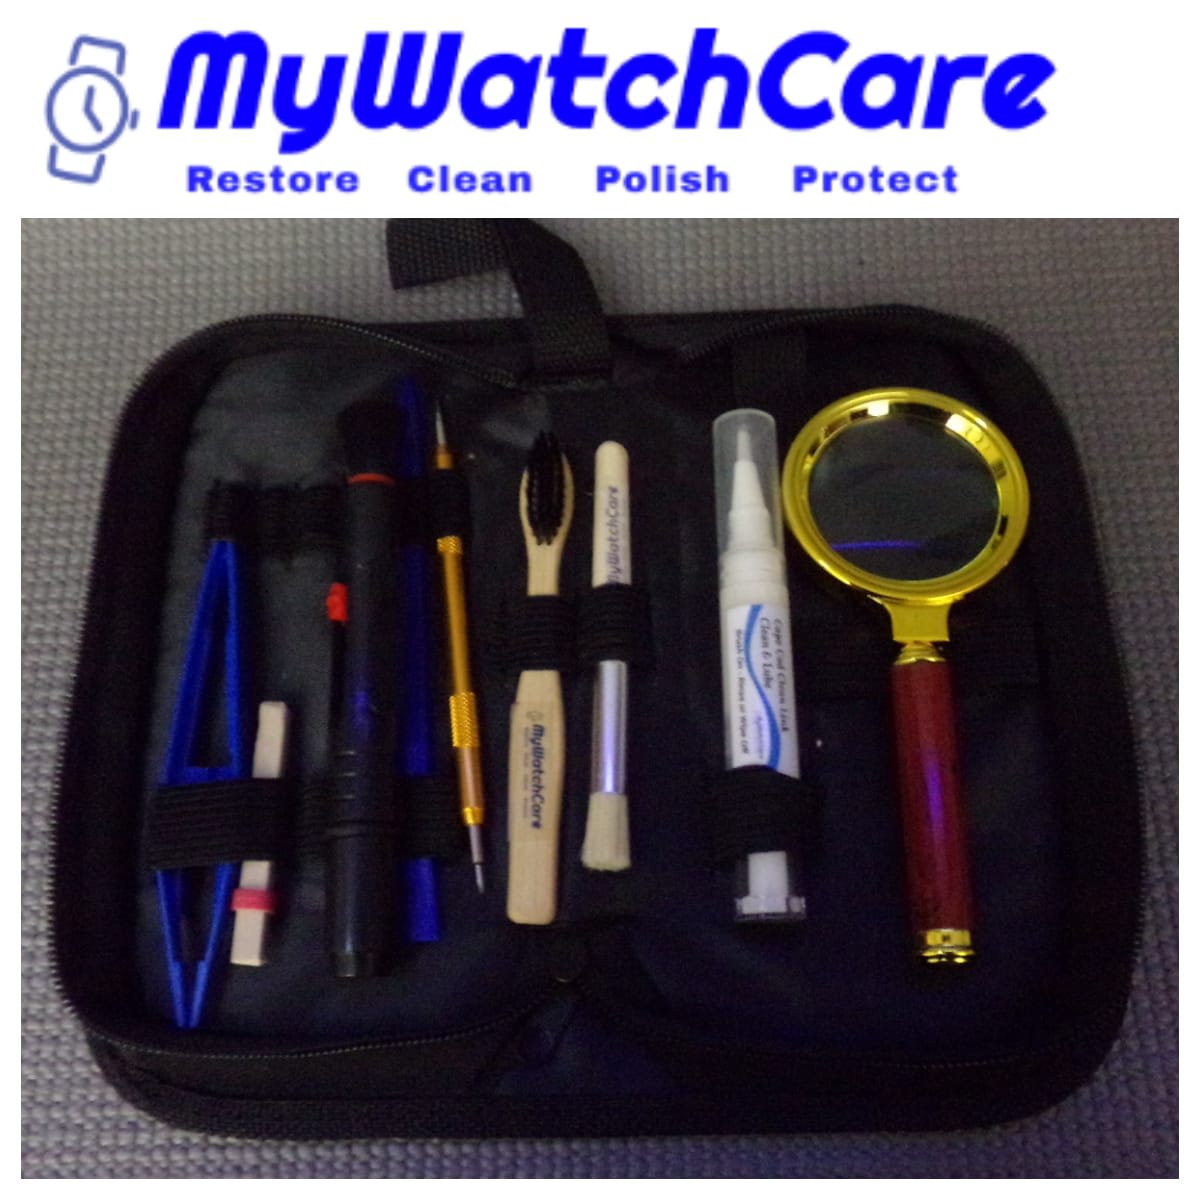 Omega Watch Care Kit - Pro Restore, Clean & Polish - My Watch Care